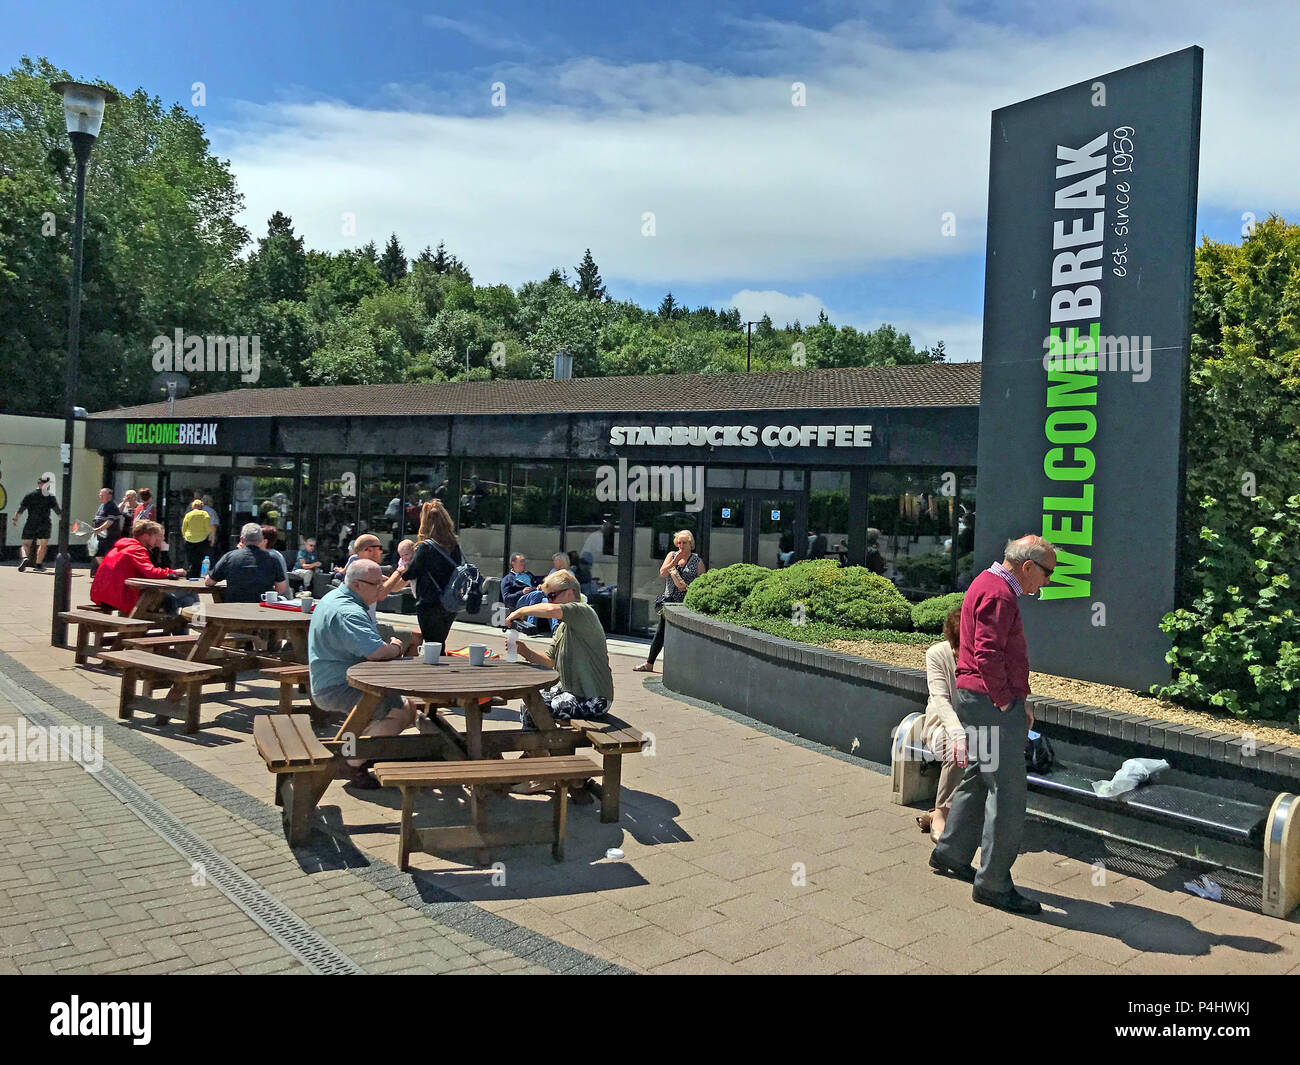 Welcome Break, Michaelwood Services - M5 South, Dursley, Southern Gloucestershire, Angleterre, Royaume-Uni, GL11 6DD Banque D'Images